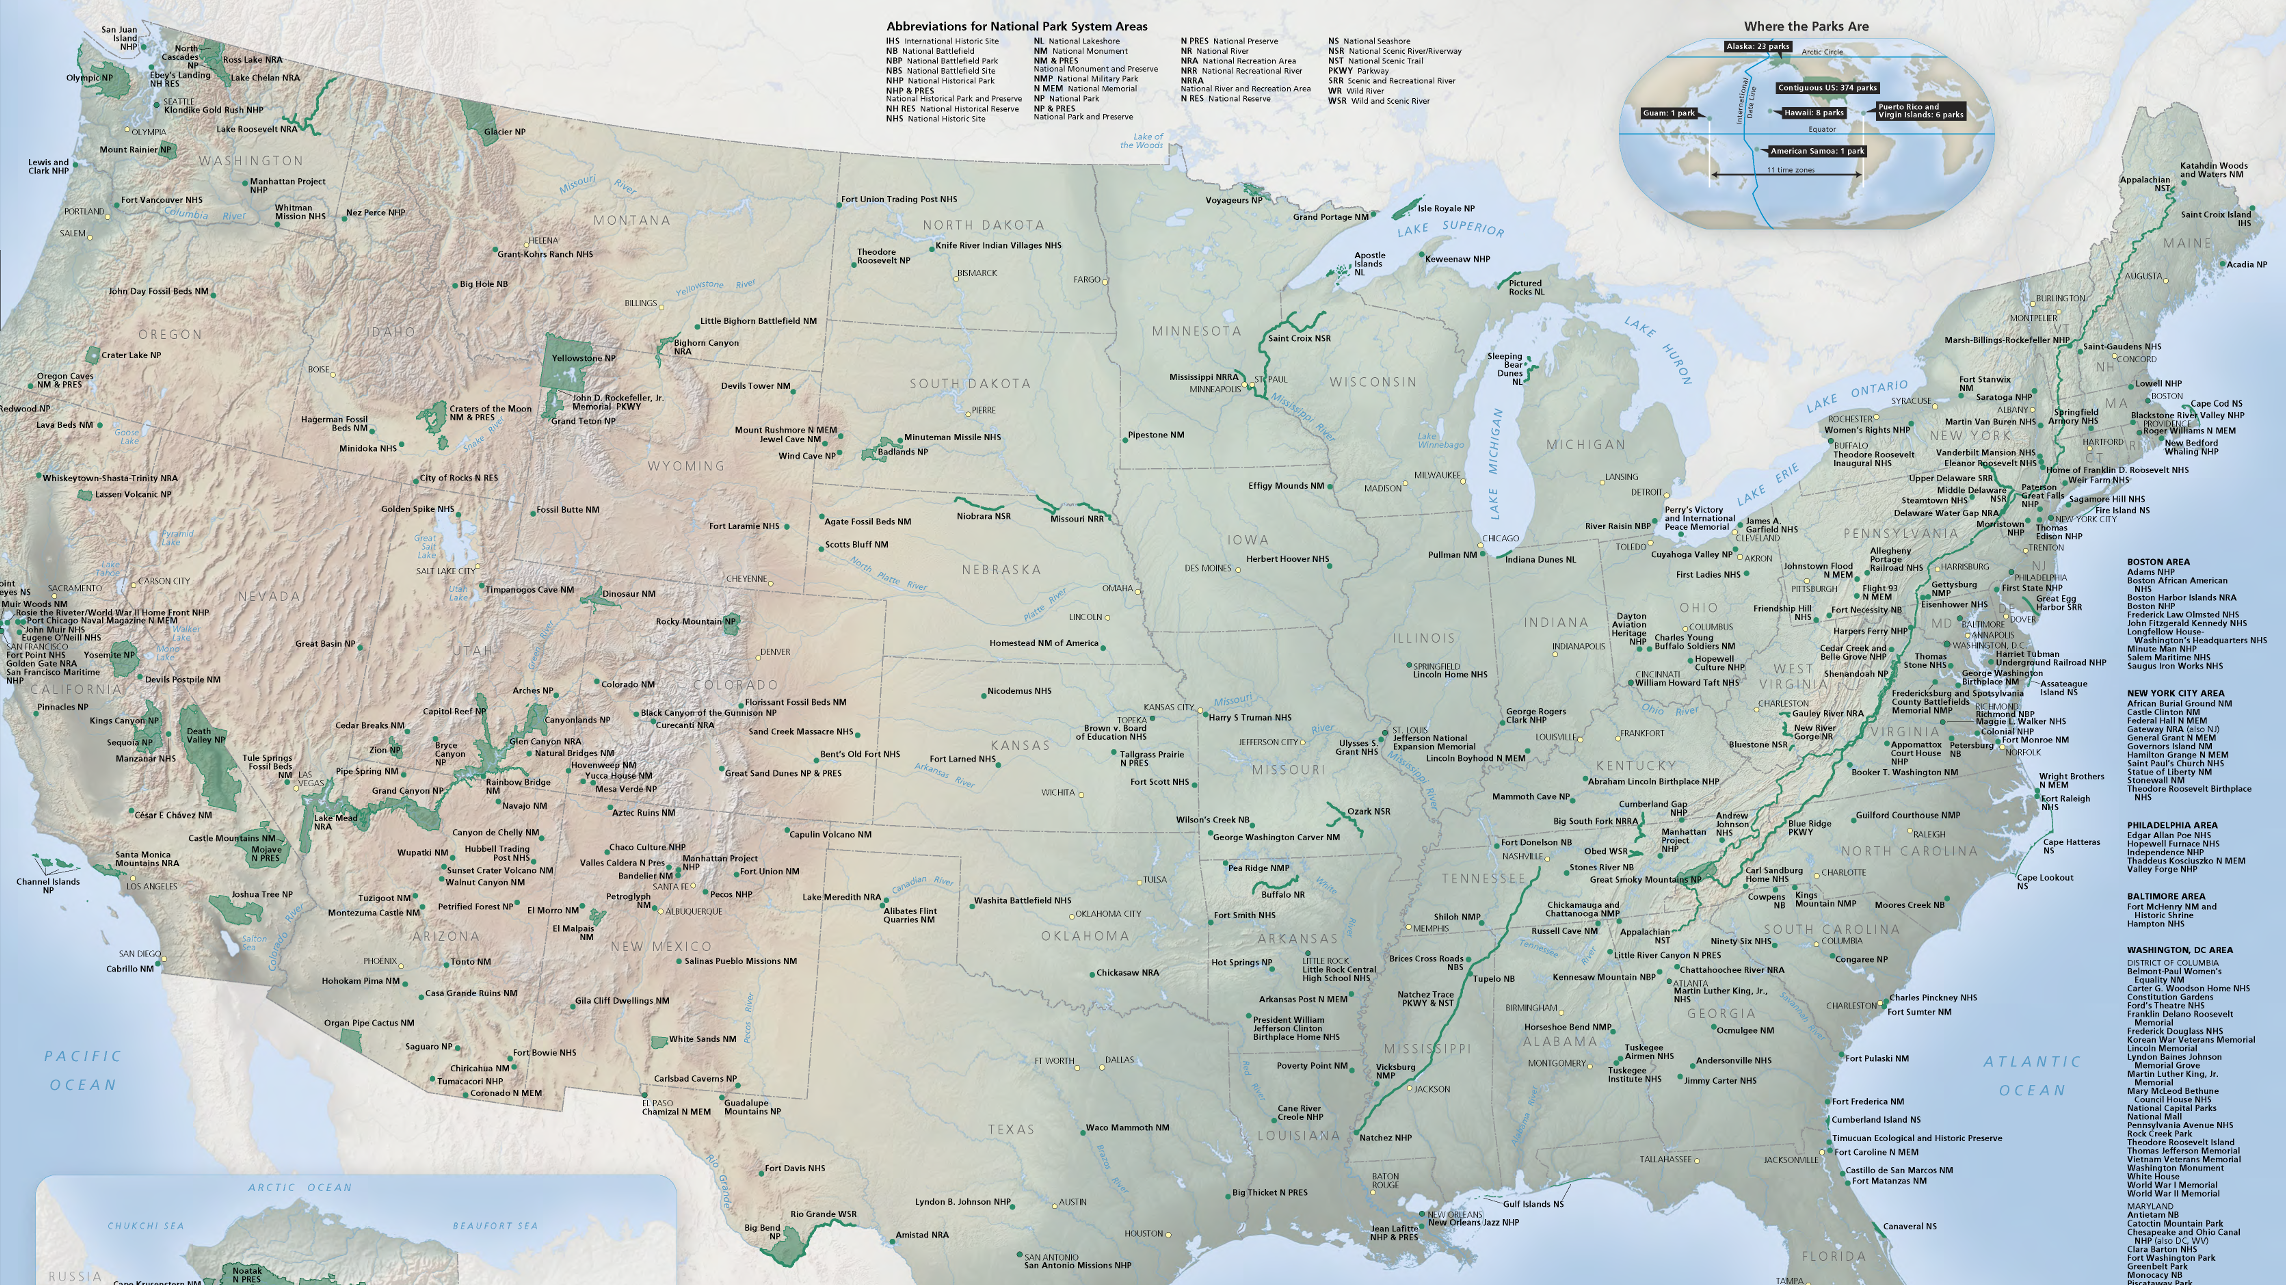 Map of national parks across the United States